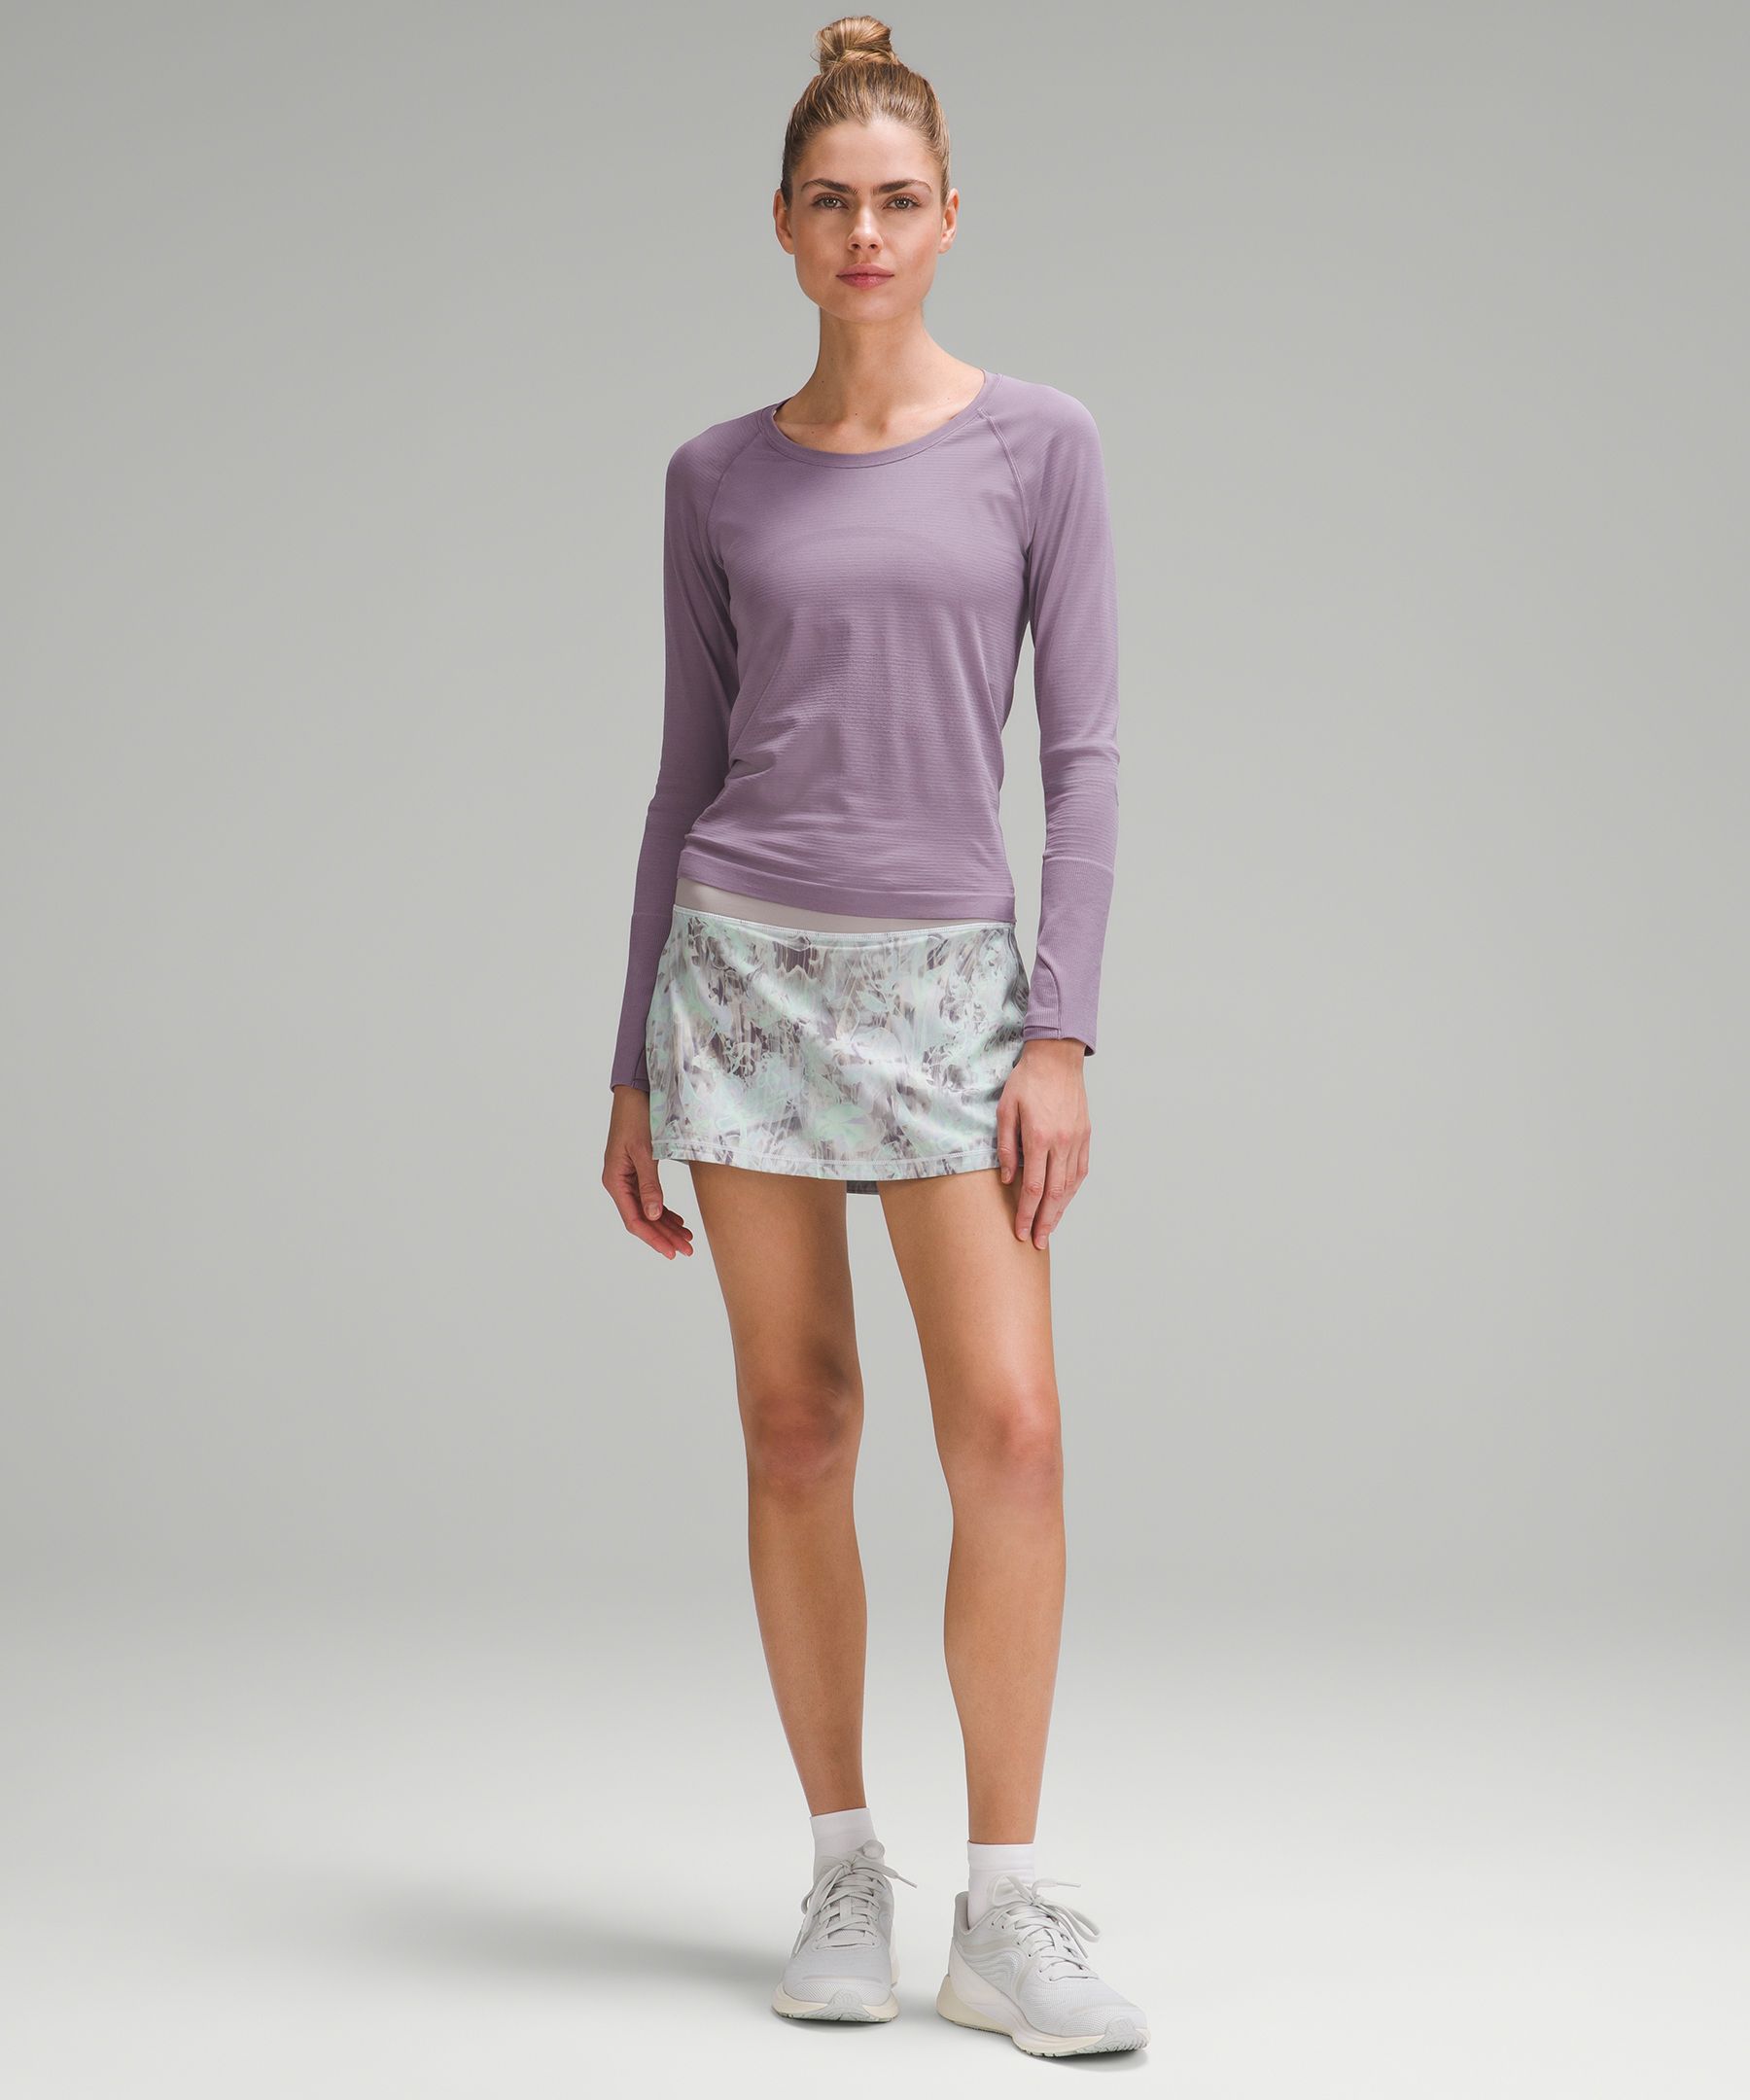 Lululemon Pace Rival Mid-Rise Skirt - Pastel Blue (First Release